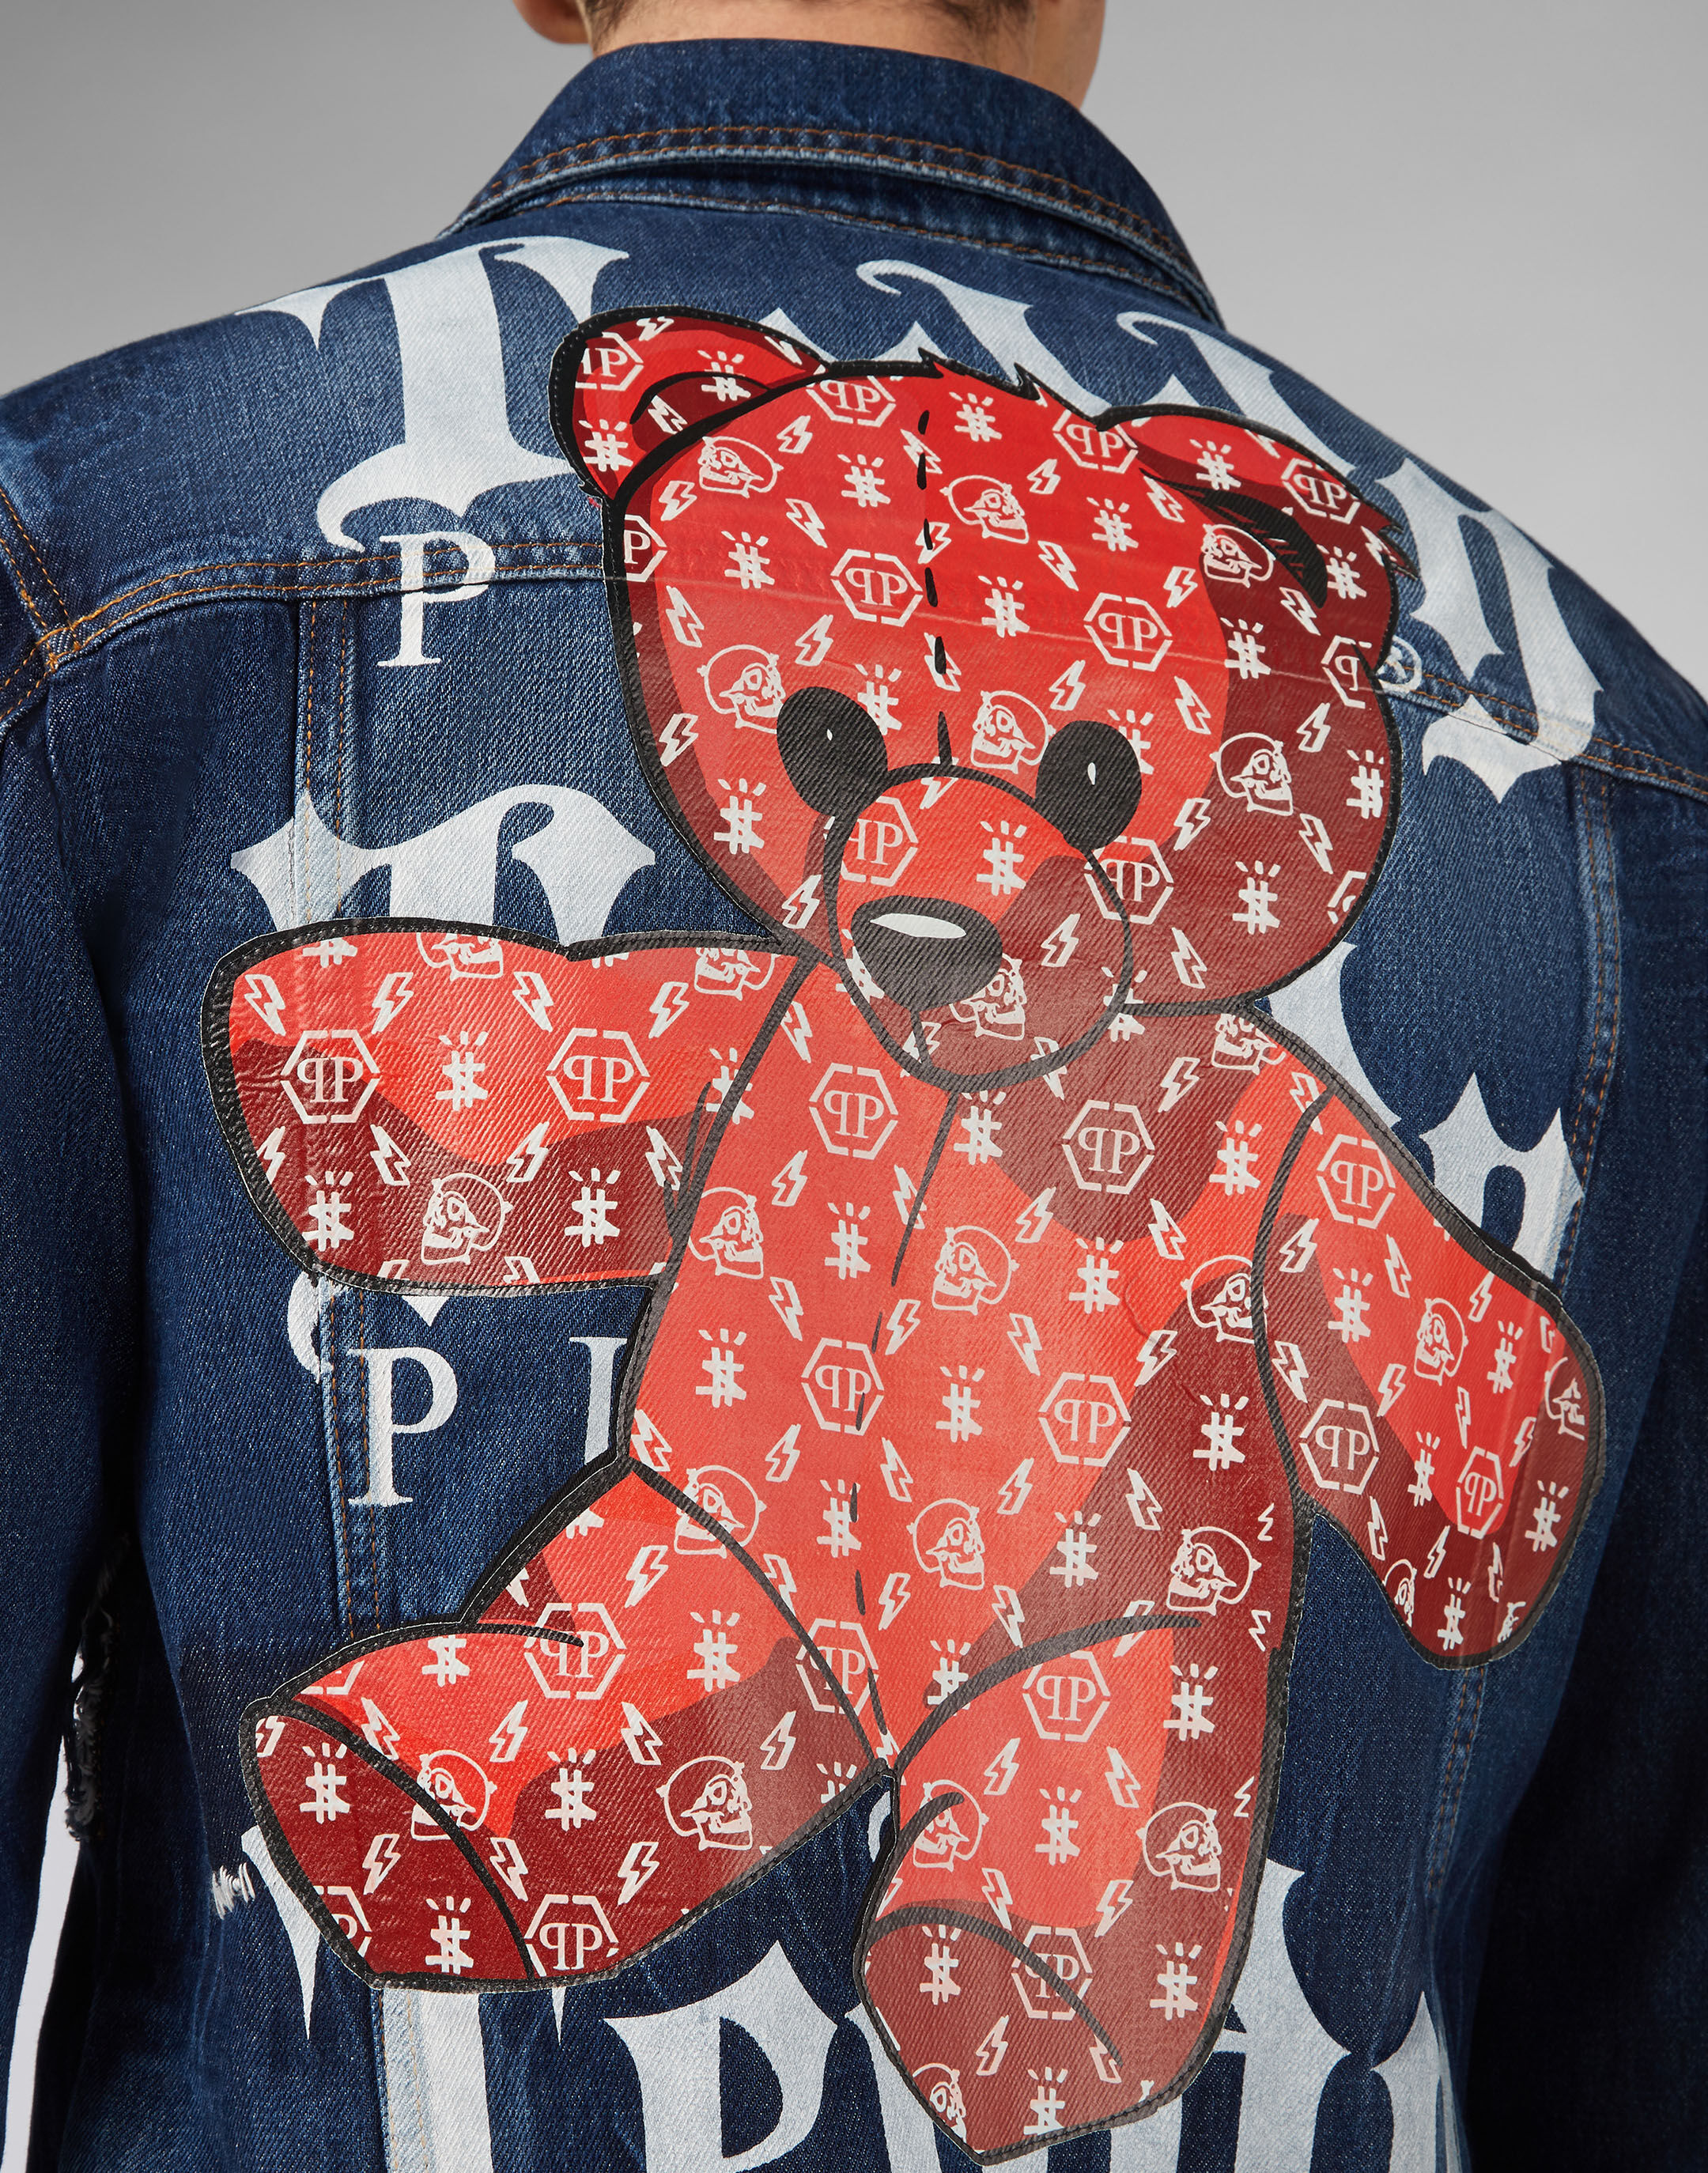 Personalised Children's Teddy Bear Denim Jacket. A1 Personalised Gifts -  Your Photos & text on gifts for Friends & Family